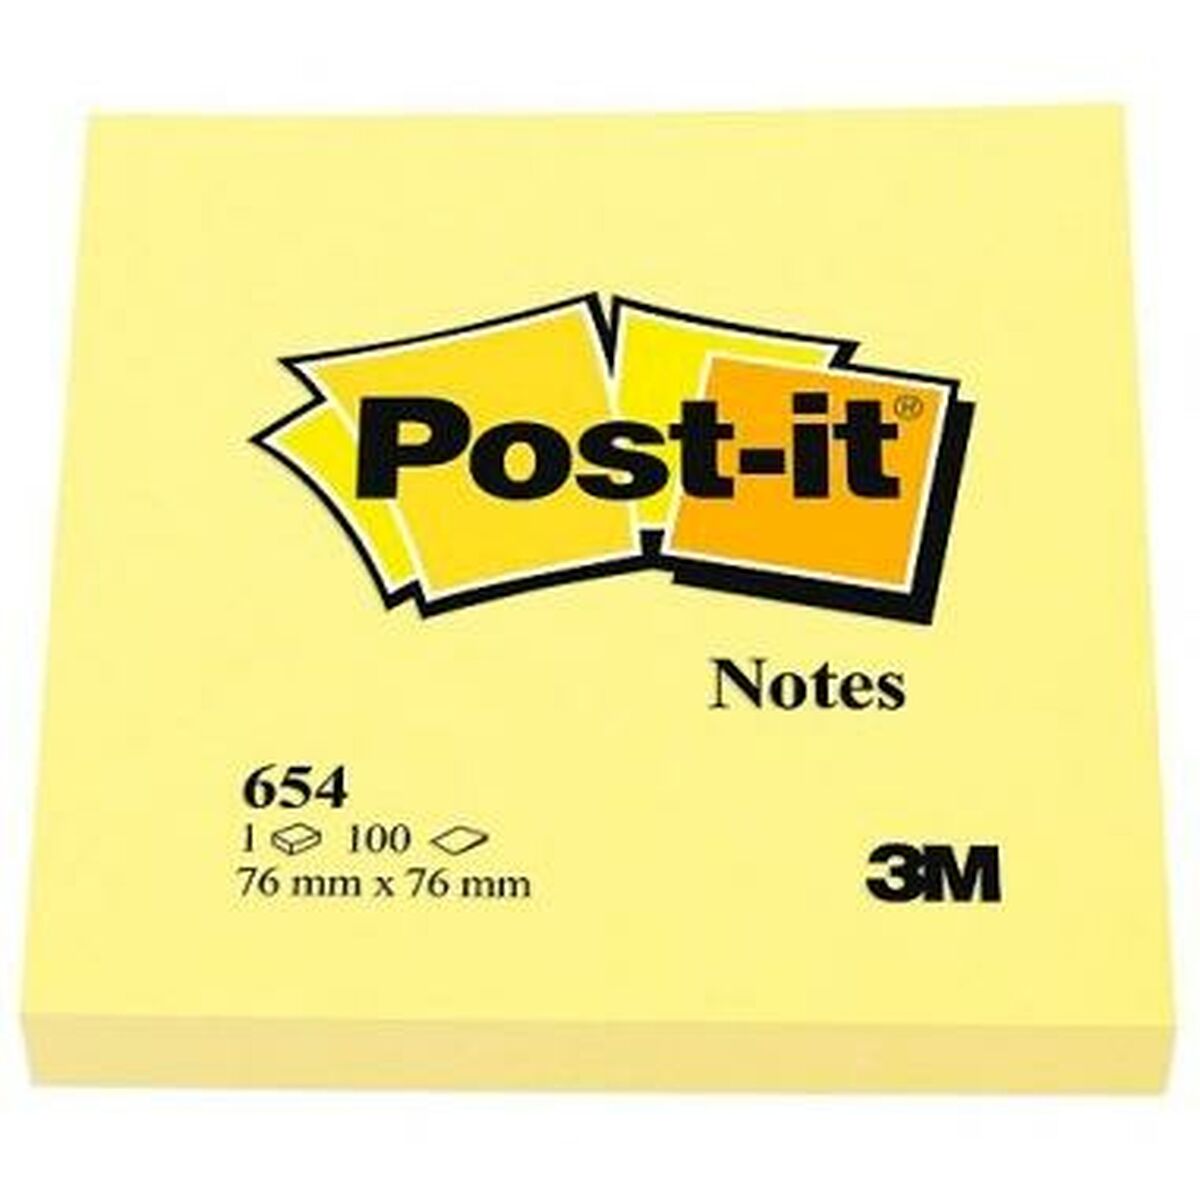 Note Adesive Post-it CANARY YELLOW Giallo 7,6 x 7,6 cm 24 Pezzi 76 x 76 mm